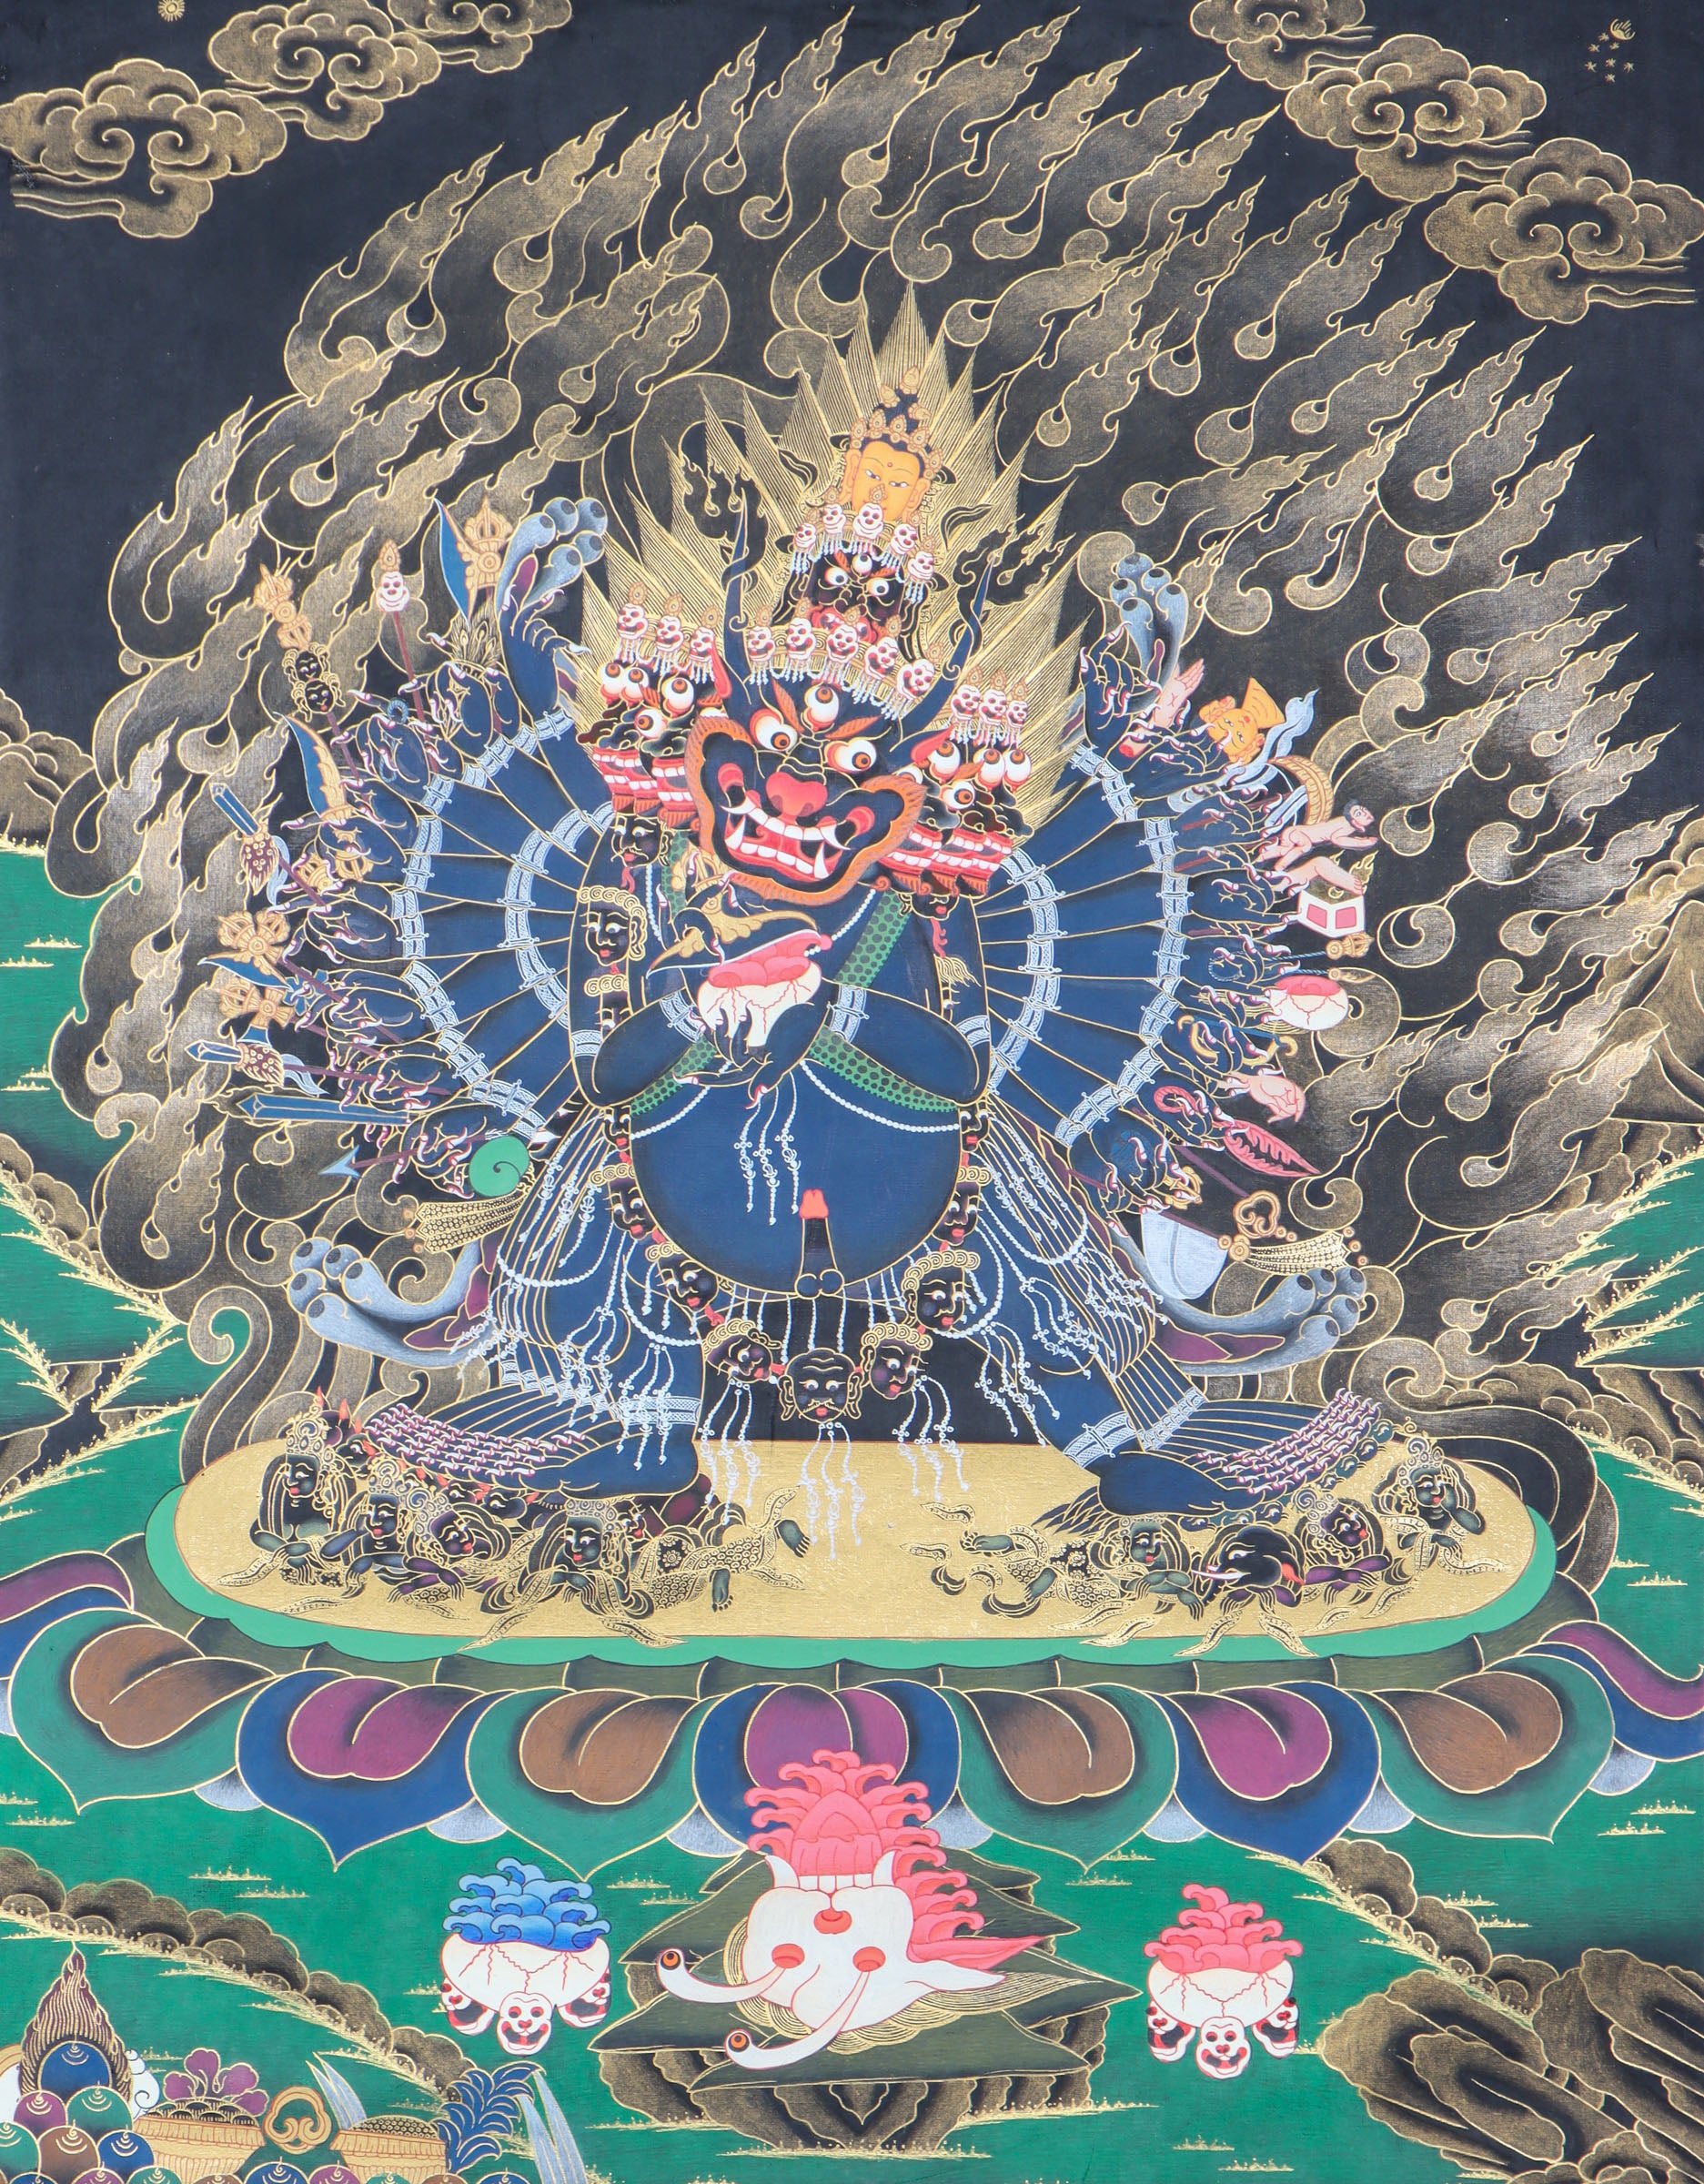 Yamantaka Thangka Painting for ignorance, delusion, and obstacles to enlightenment.